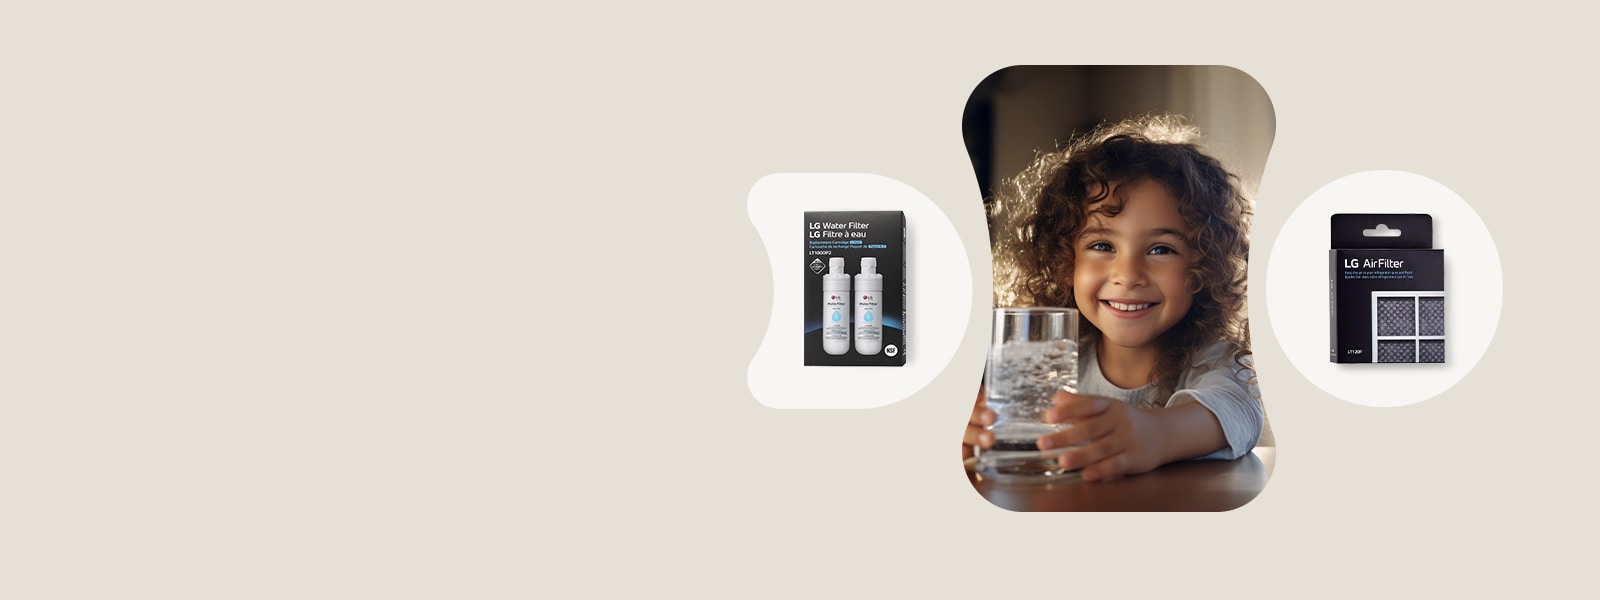 Buy a 2 pack of LG Water Filters and get a Bonus LG Air Filter*1